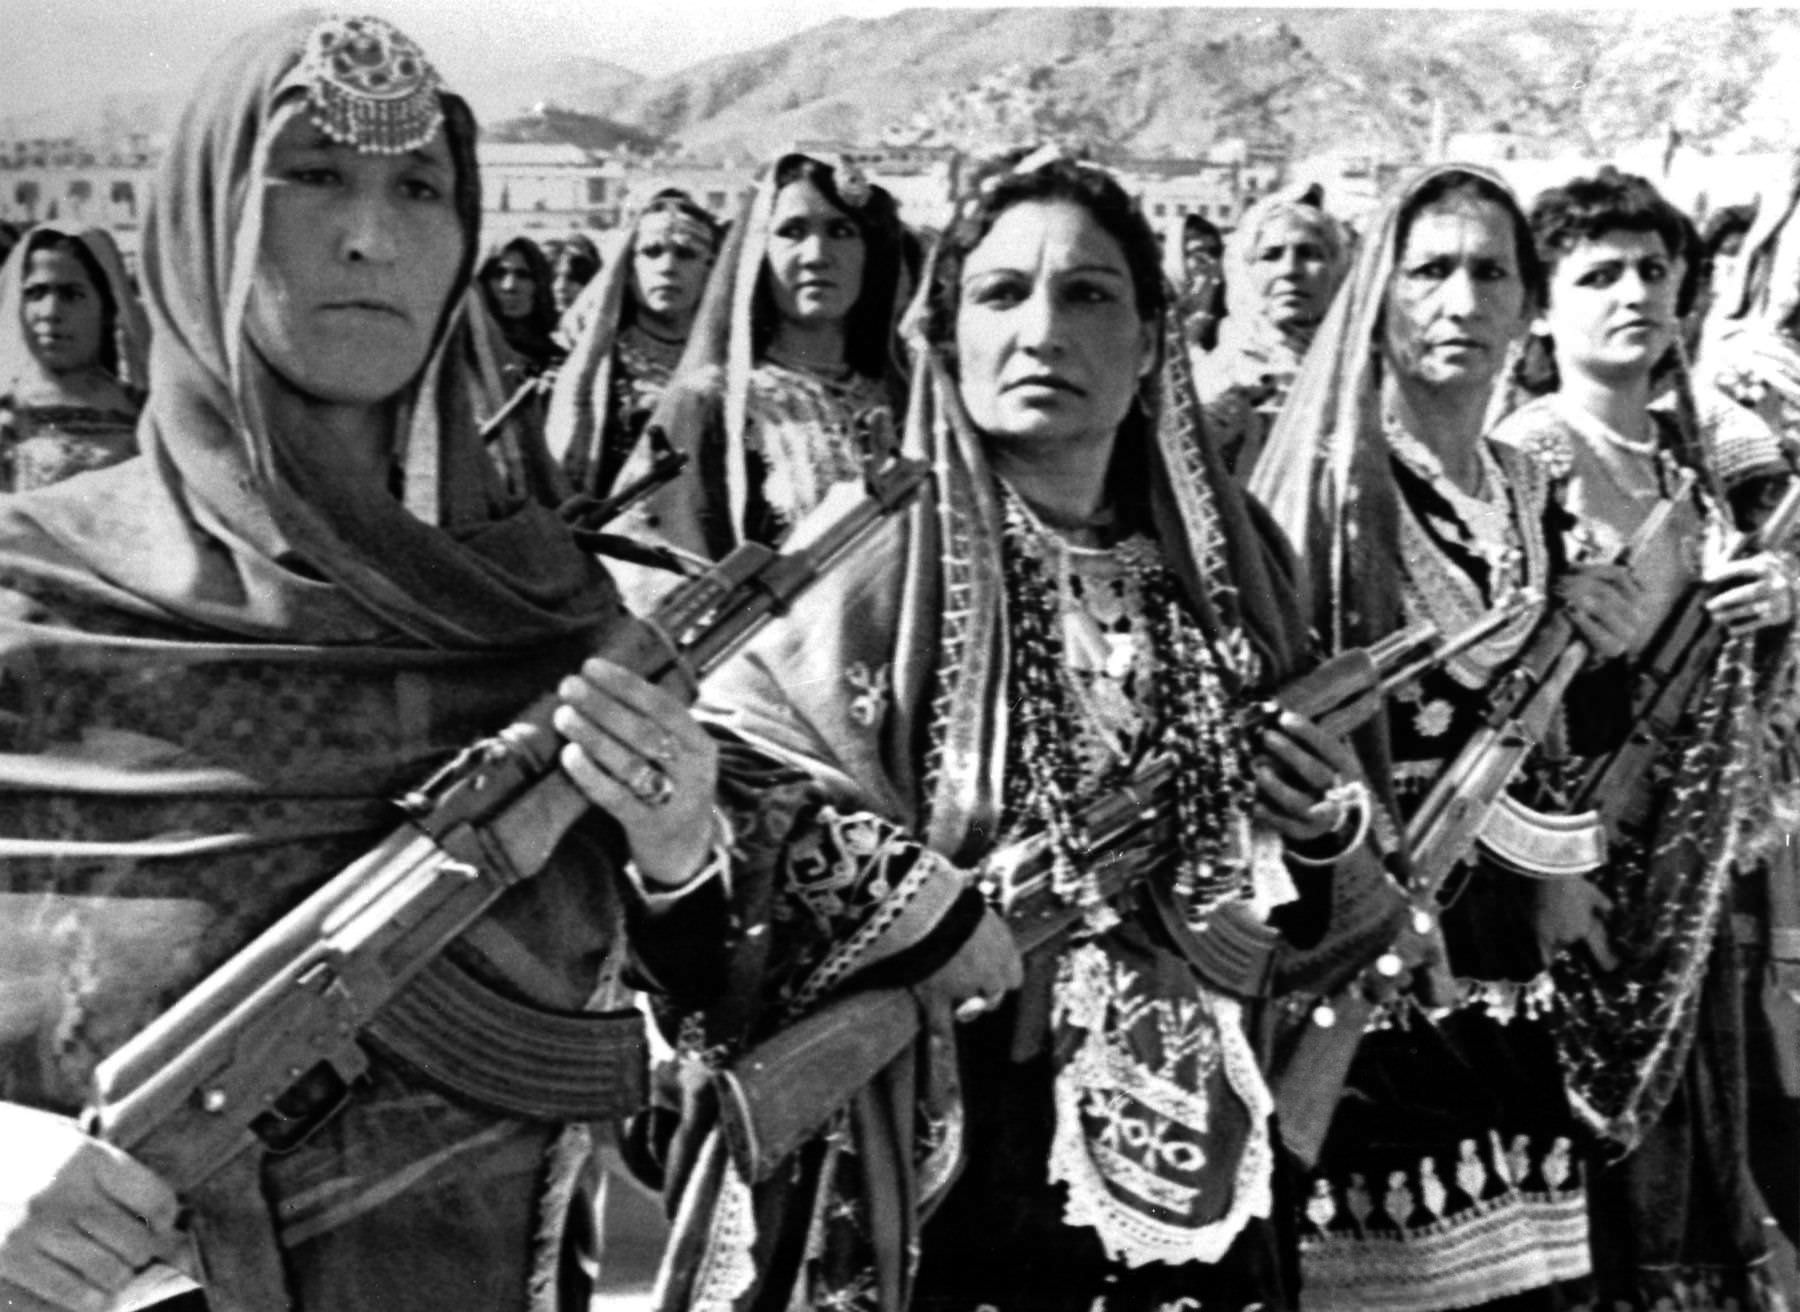 Female Afghan village defense forces wearing traditional tribal clothes during a parade to mark the 10th anniversary of the communist revolution in Kabul, Afghanistan in 1988.